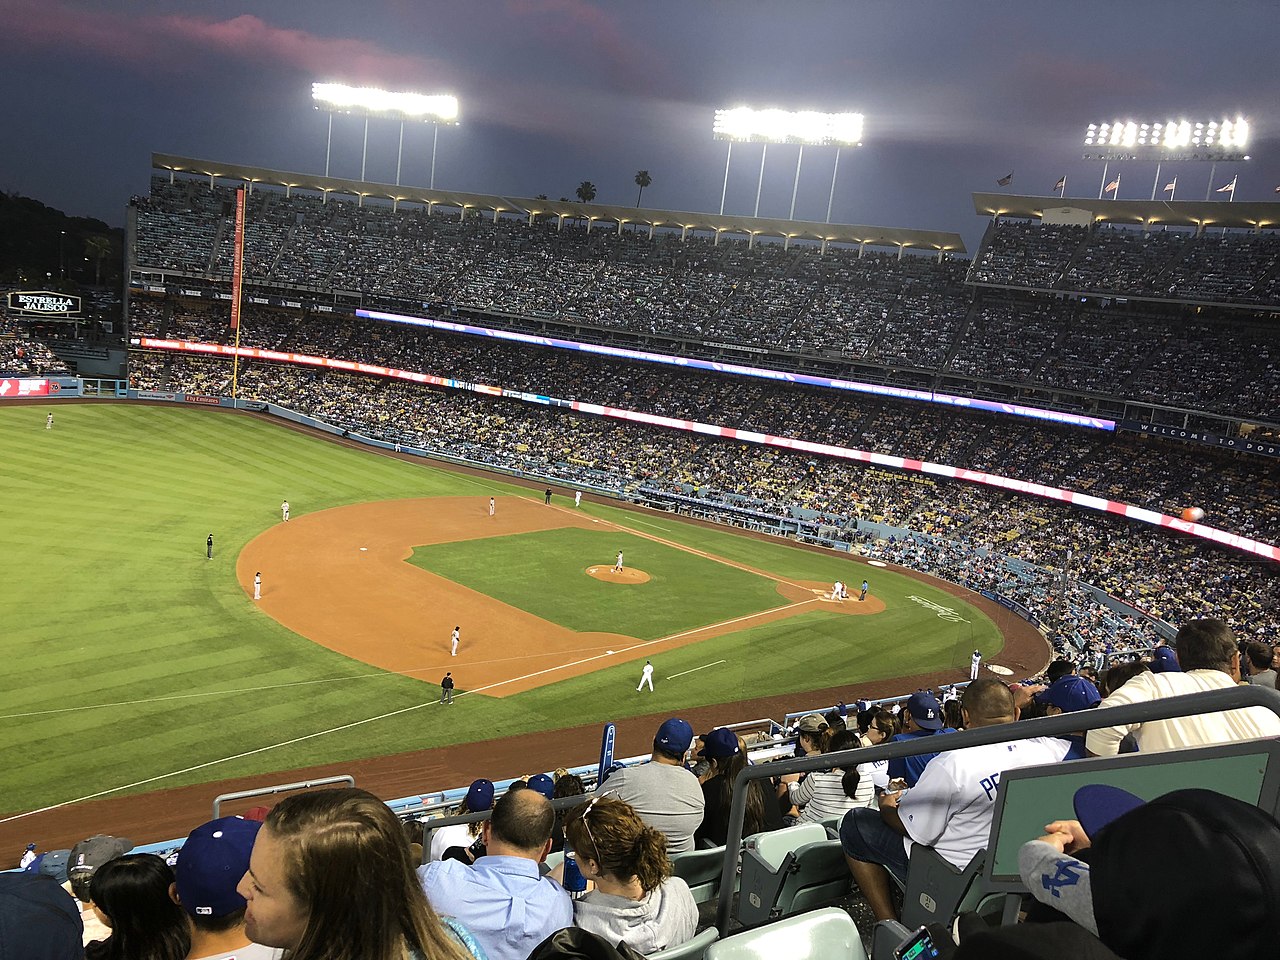 Dodger Stadium, home of the Los Angeles Dodgers